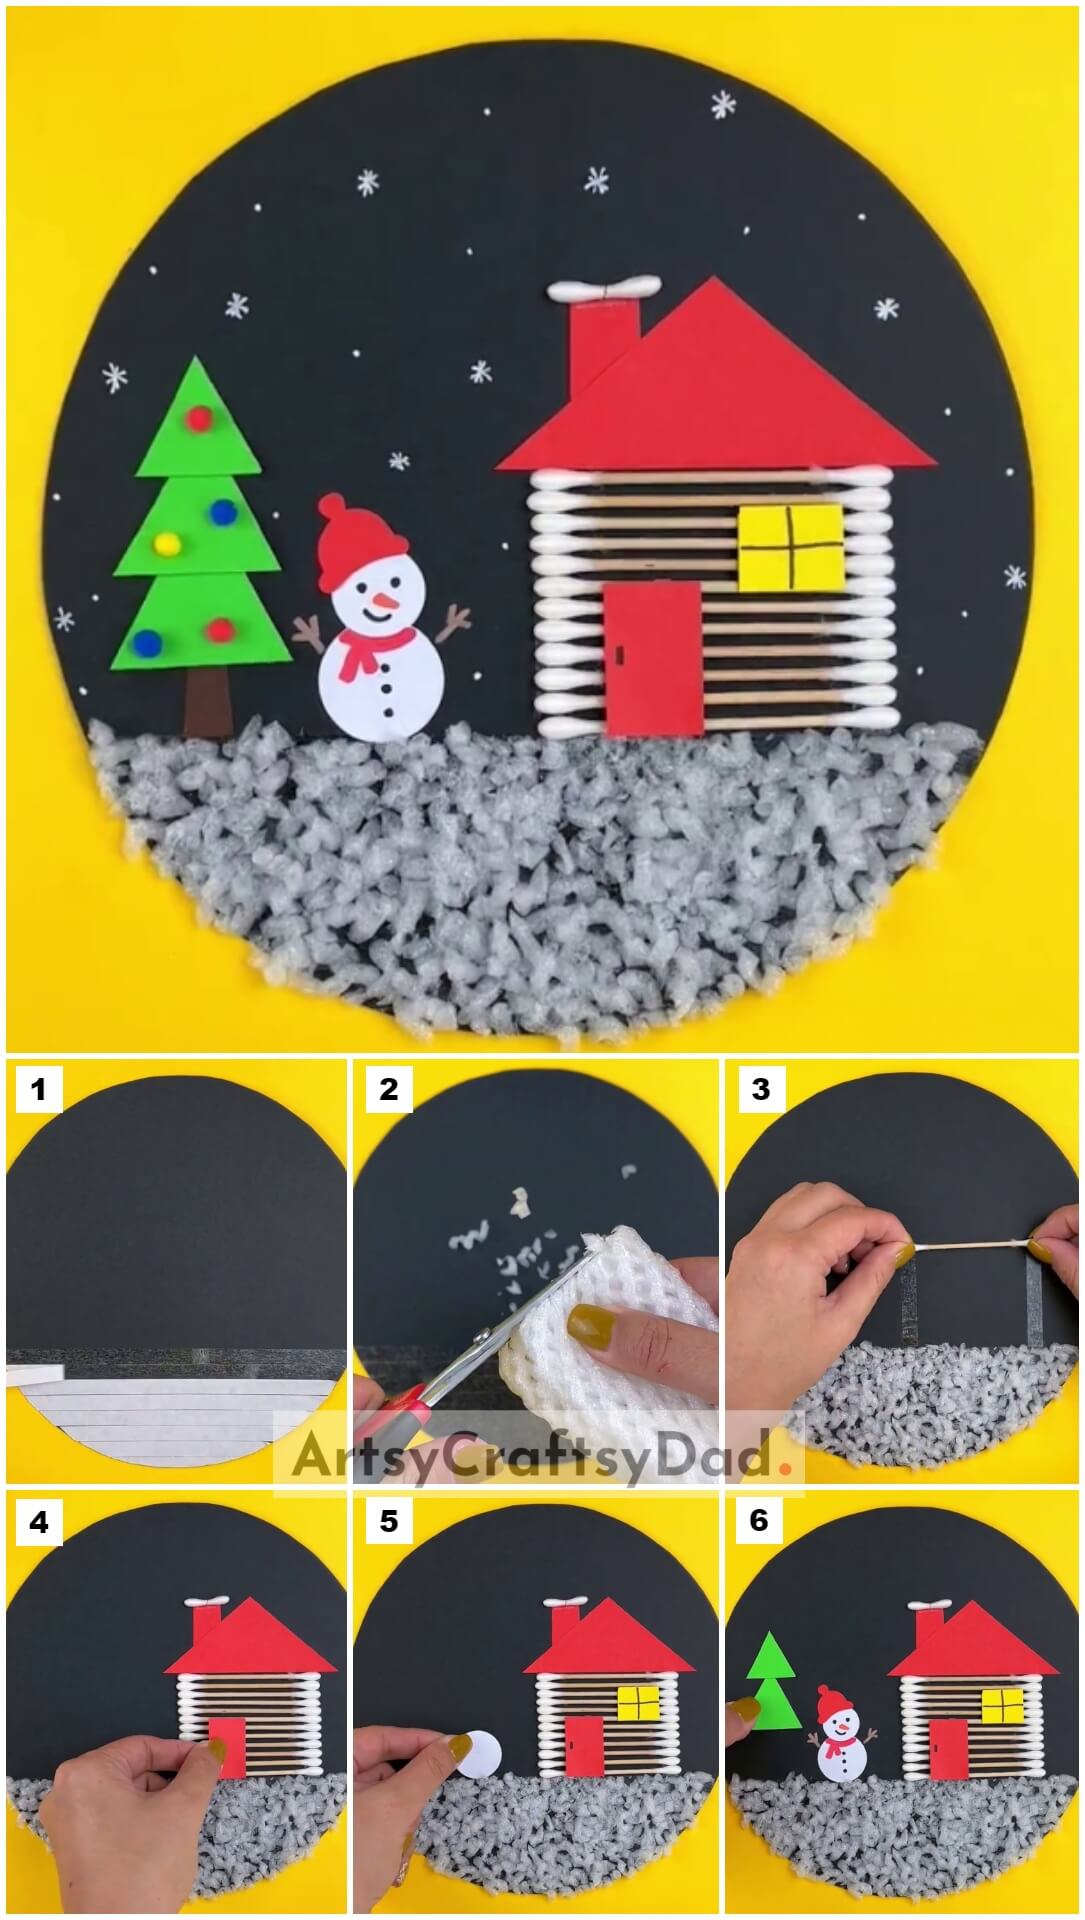 DIY Snowman & House Christmas Craft Tutorial Using Recycled Materials